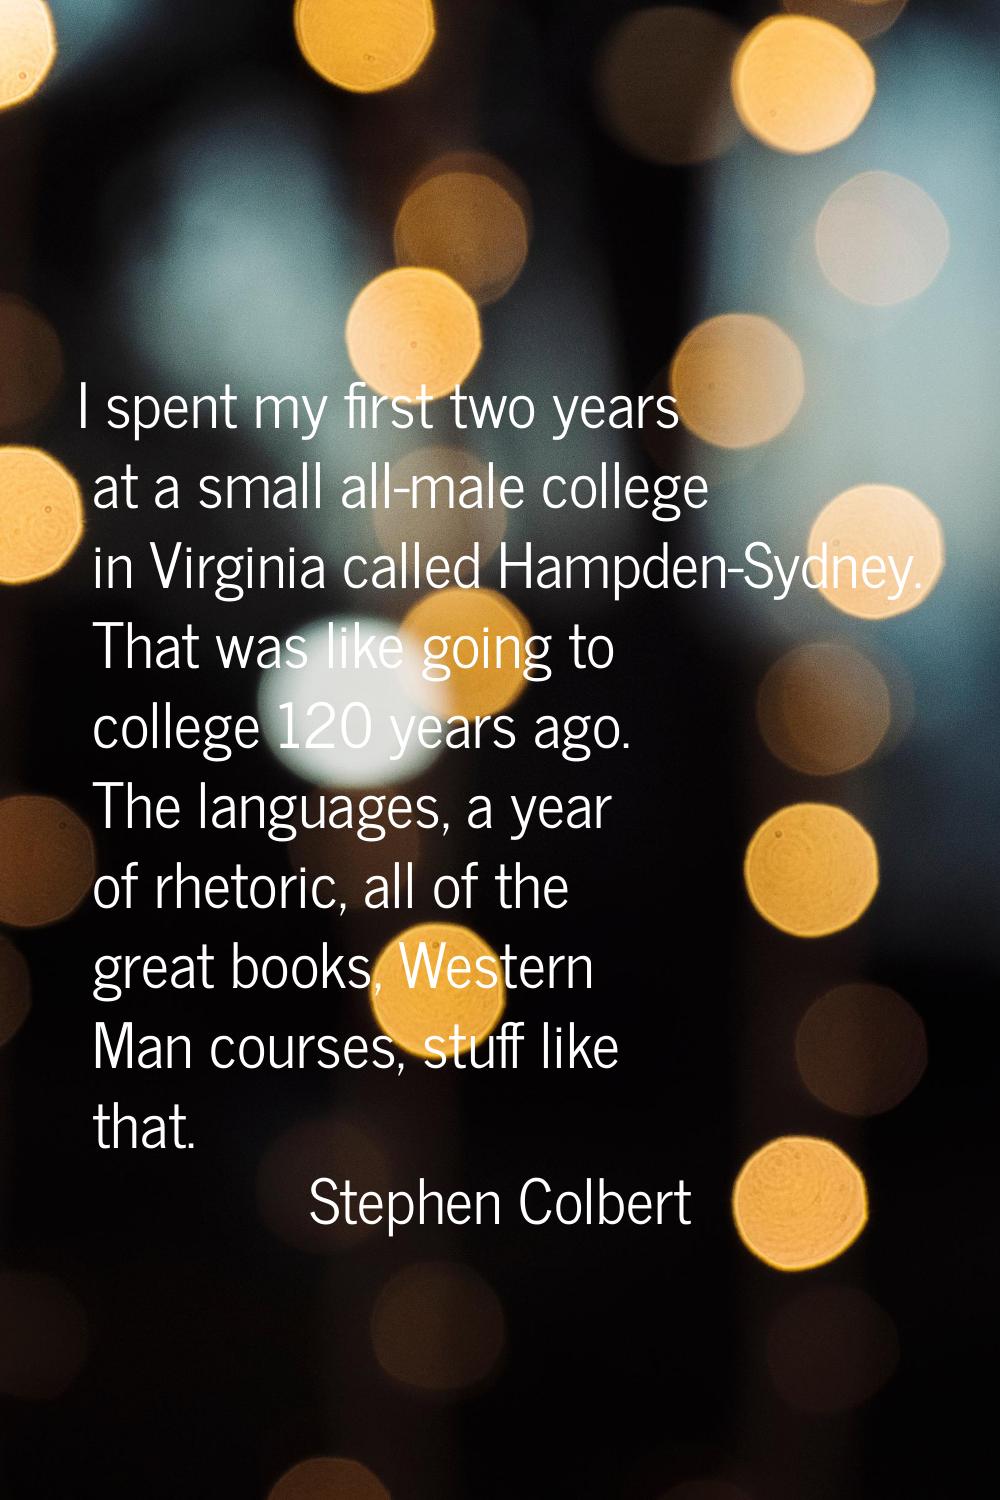 I spent my first two years at a small all-male college in Virginia called Hampden-Sydney. That was 